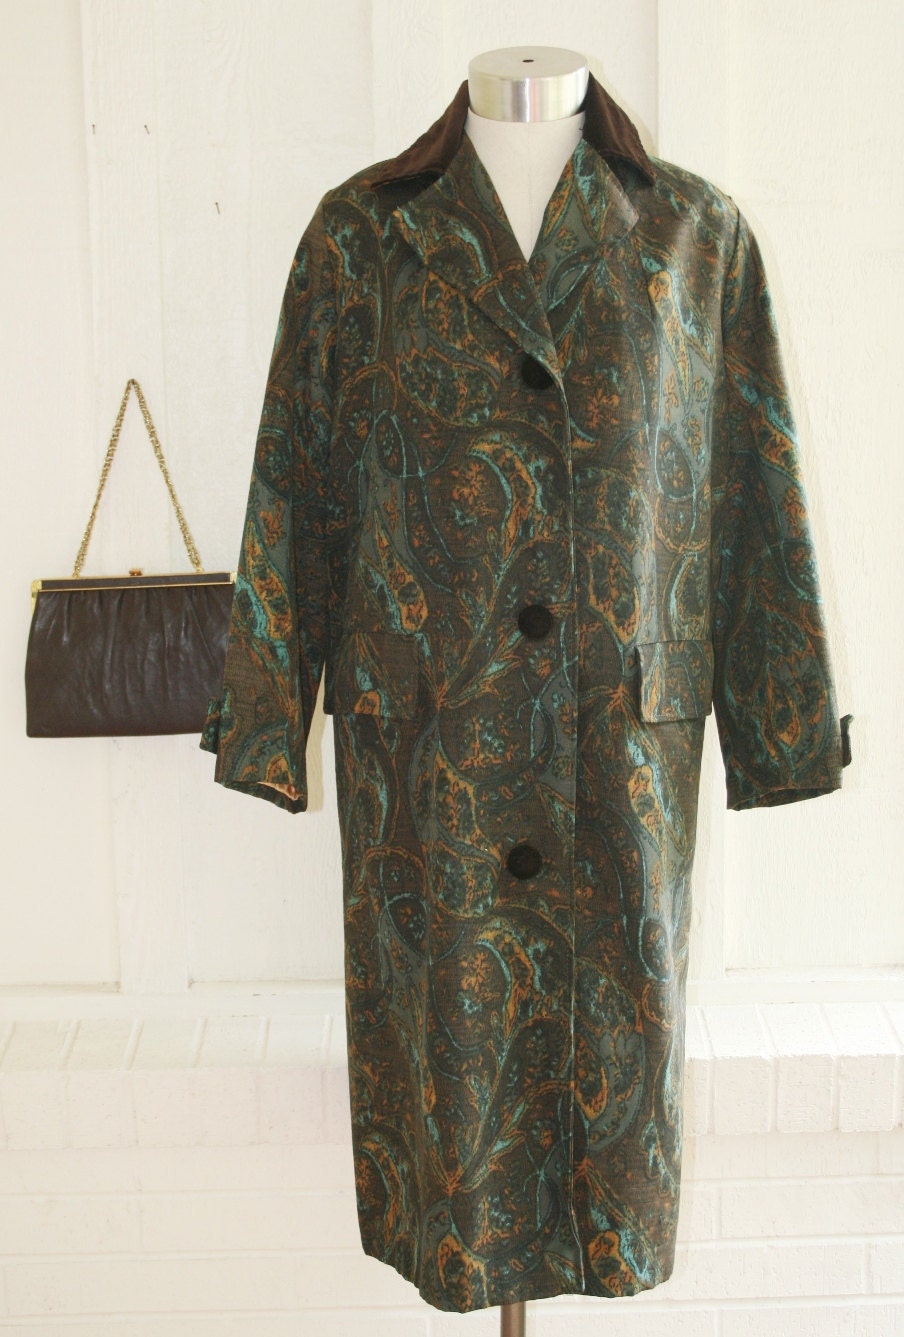 Take Good Care of Yourself, You Belong to Me - 1950's Overcoat -Raincoat - Paisly Print with Velvet Trims -   Styled by Lanson